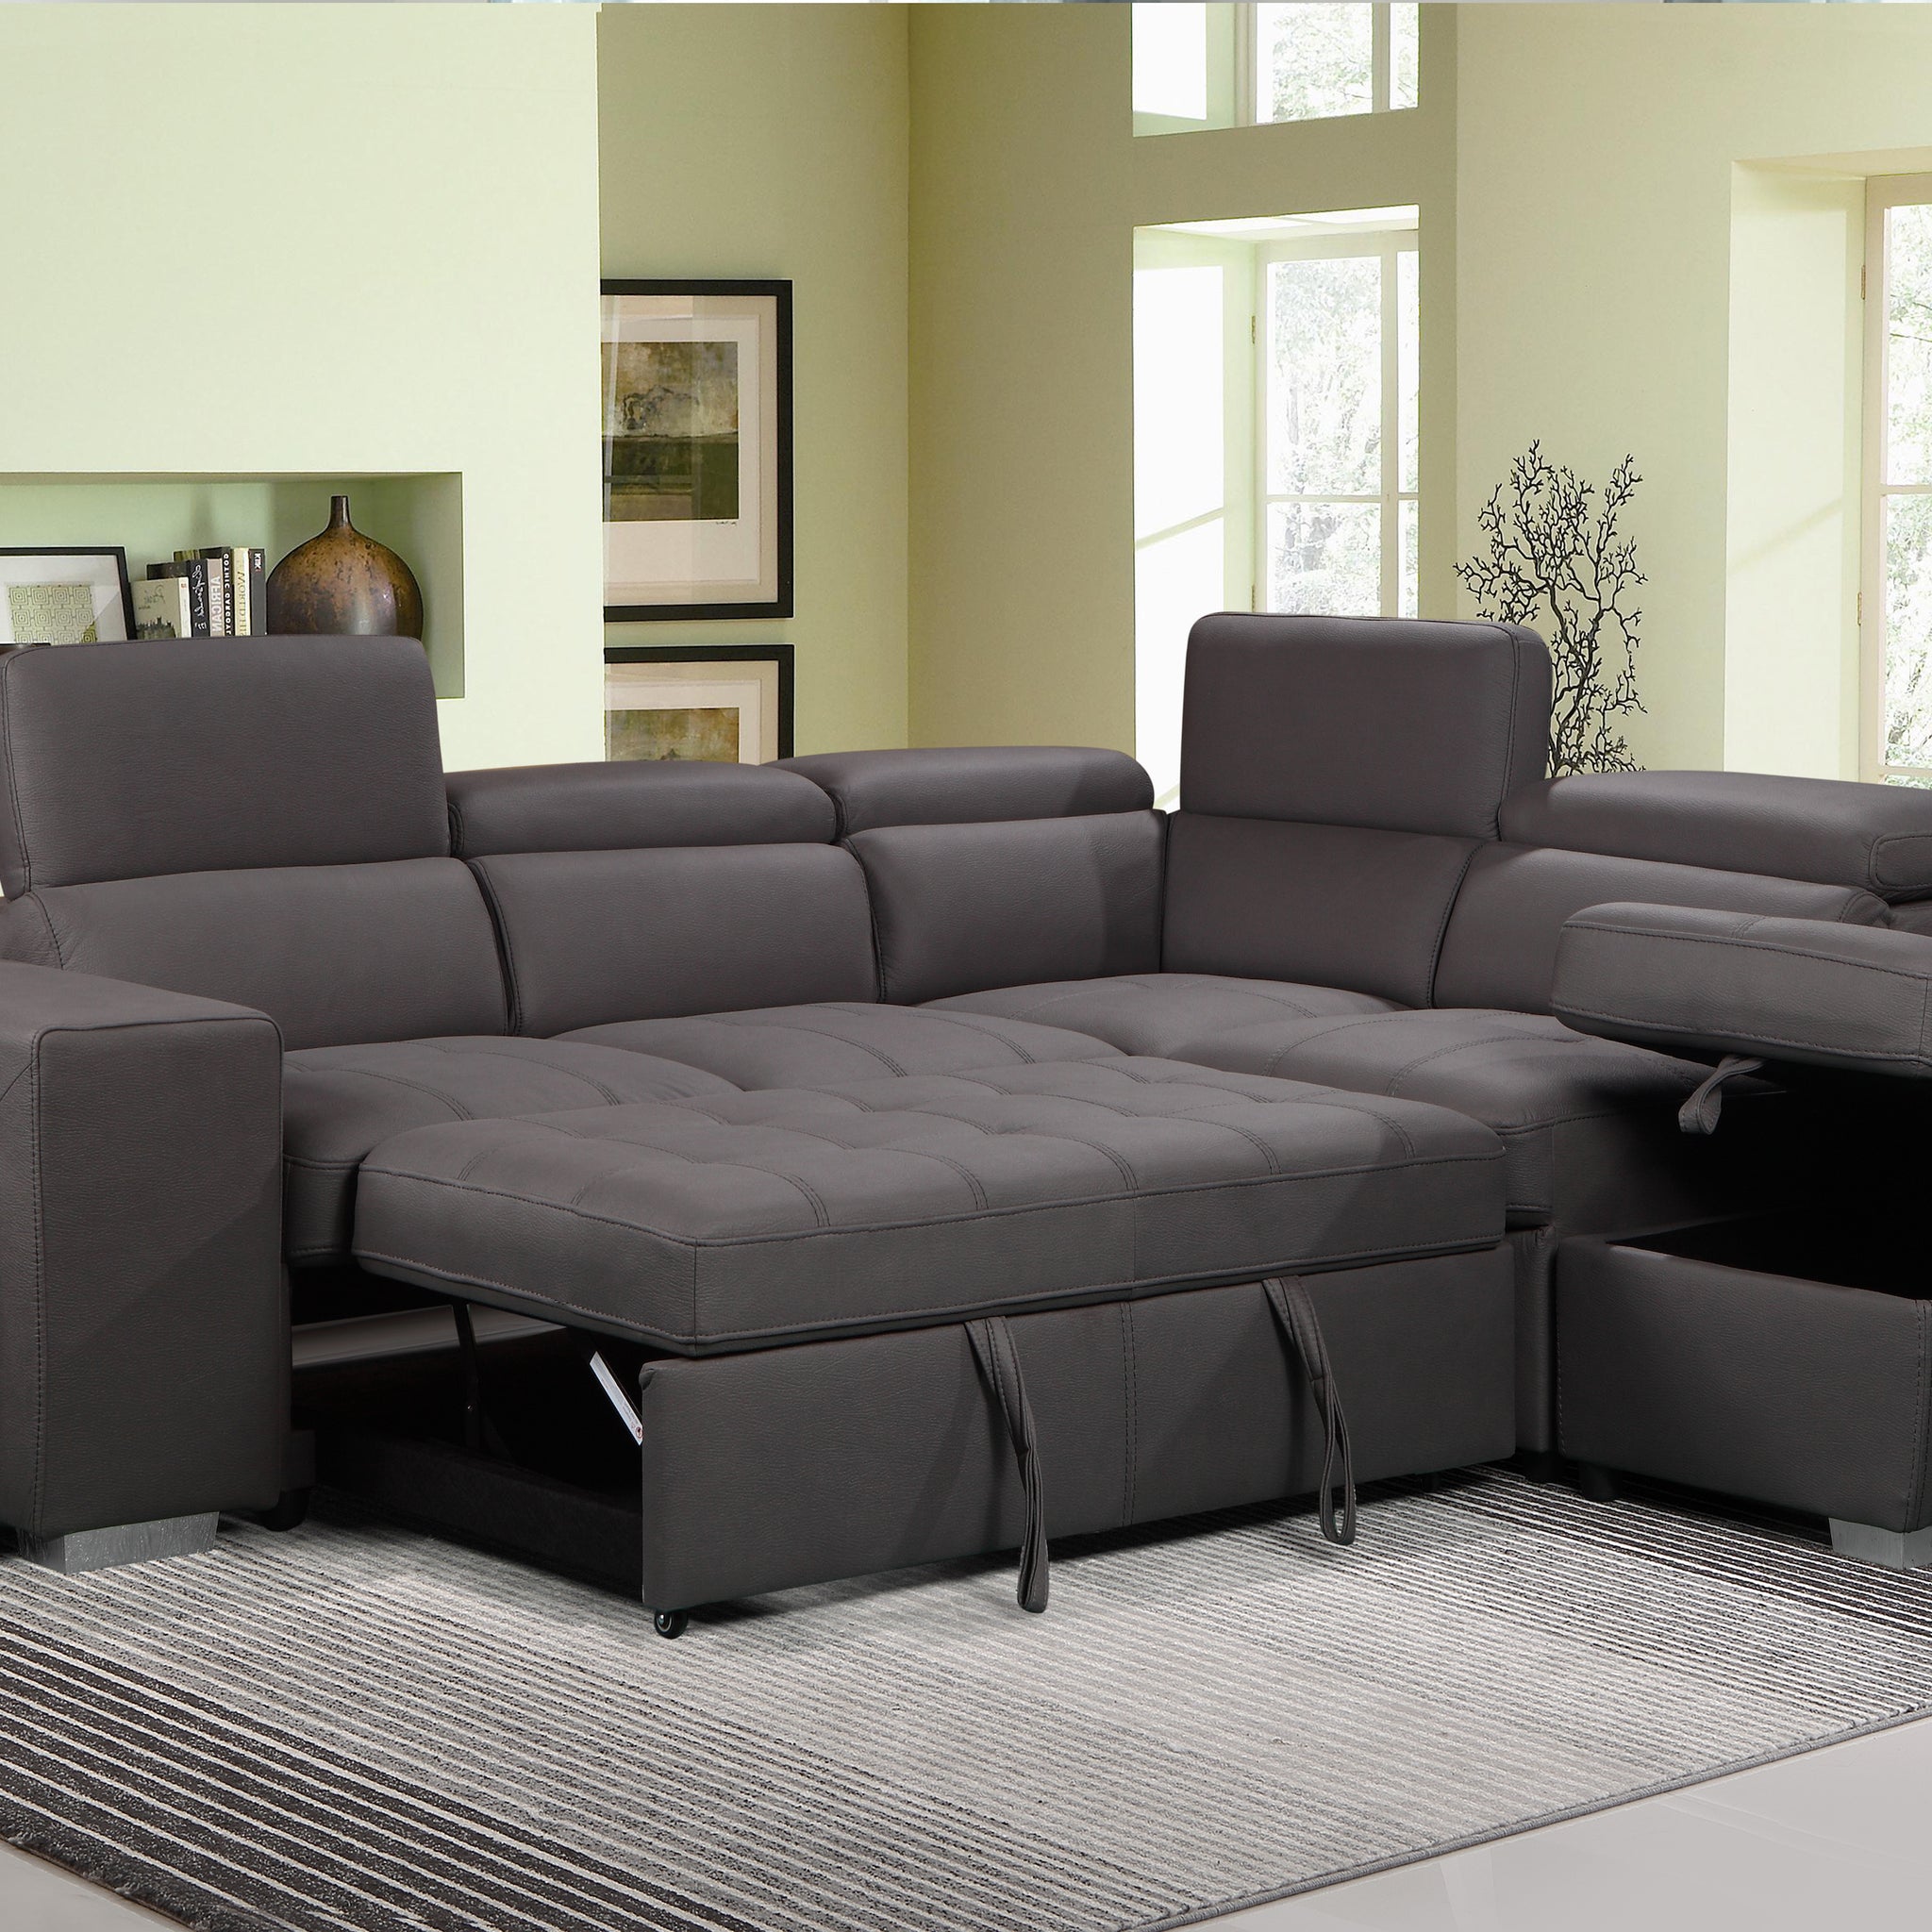 Positano - Modern Sofa Bed Sectional With Adjustable Headrests, Stools & USB Ports